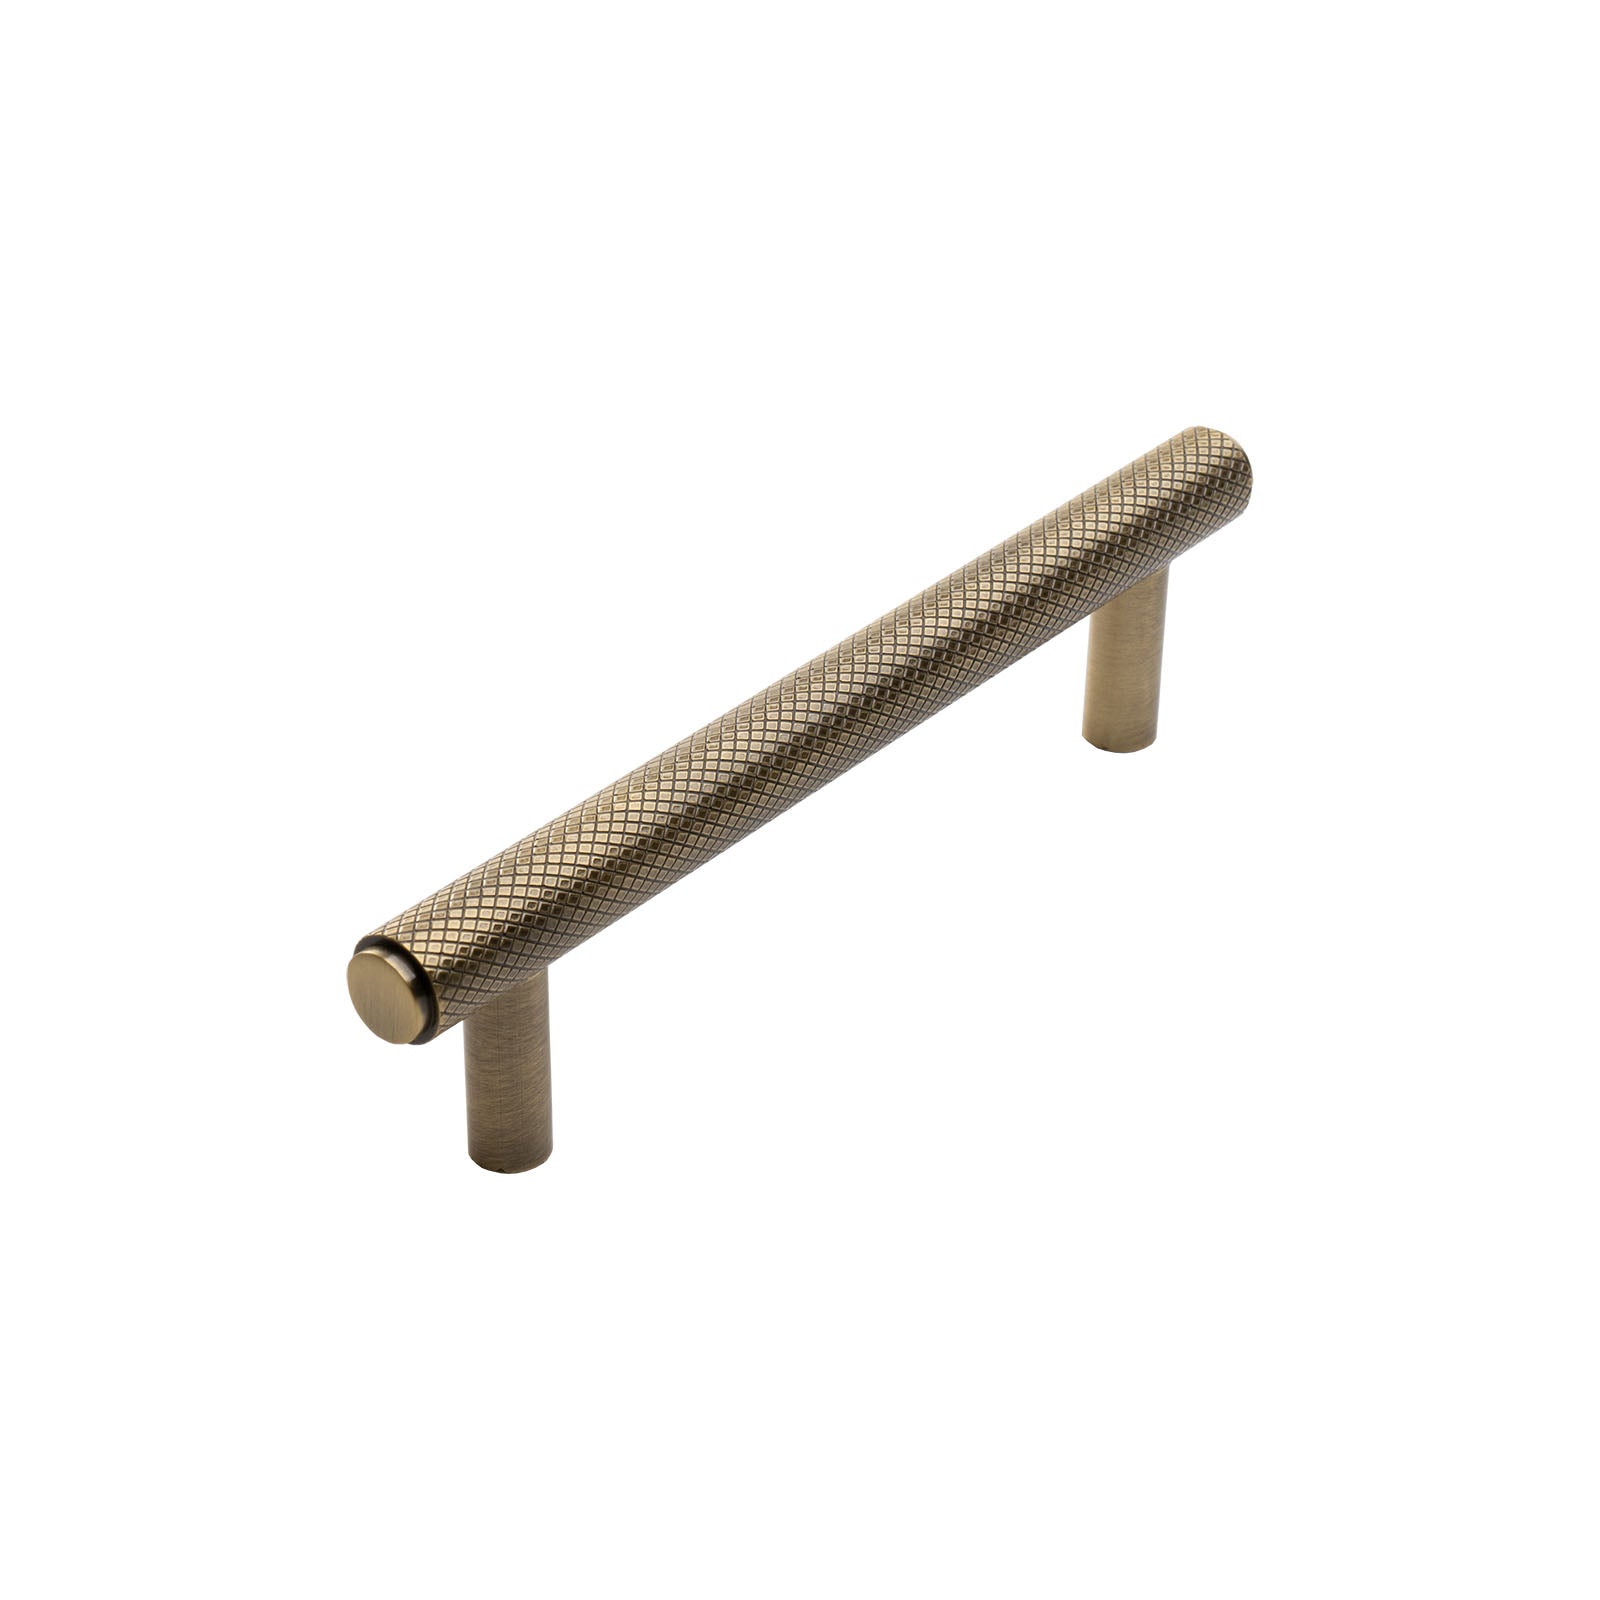 Aged Brass Knurled Pull Handle SHOW